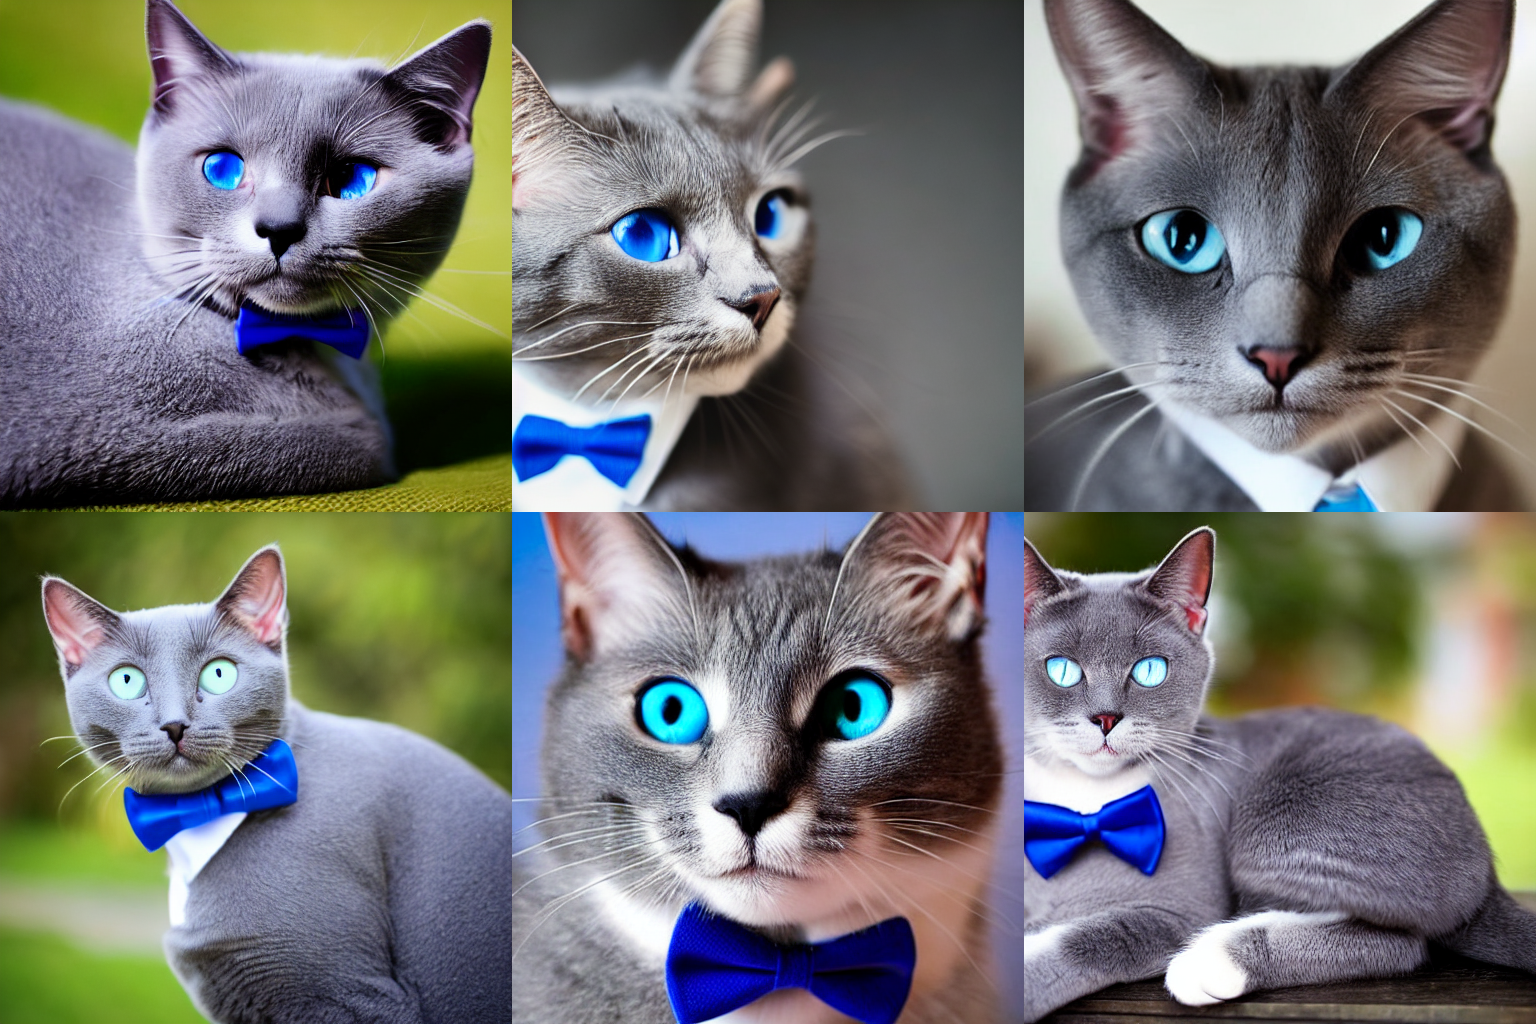 Another panel of 6 output images from Stable Diffusion using the prompt &quot;Cute grey cat with blue eyes, wearing a bowtie&quot;